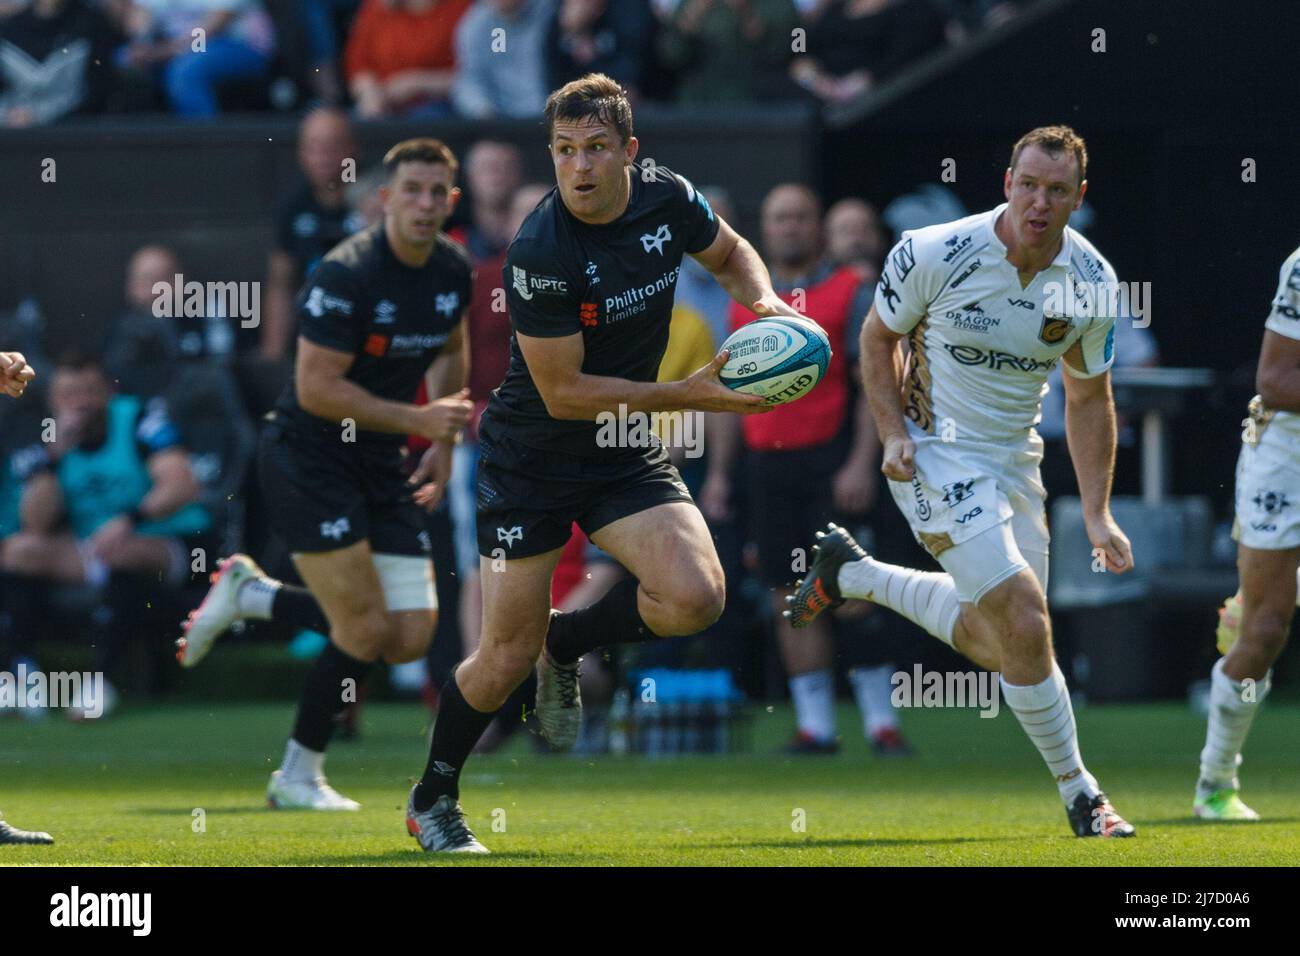 Swansea, UK. 8 May, 2022. Michael Collins of Ospreys on the attack during the Ospreys v Dragons United Rugby Championship Match. Credit: Gruffydd ThomasAlamy Stock Photo